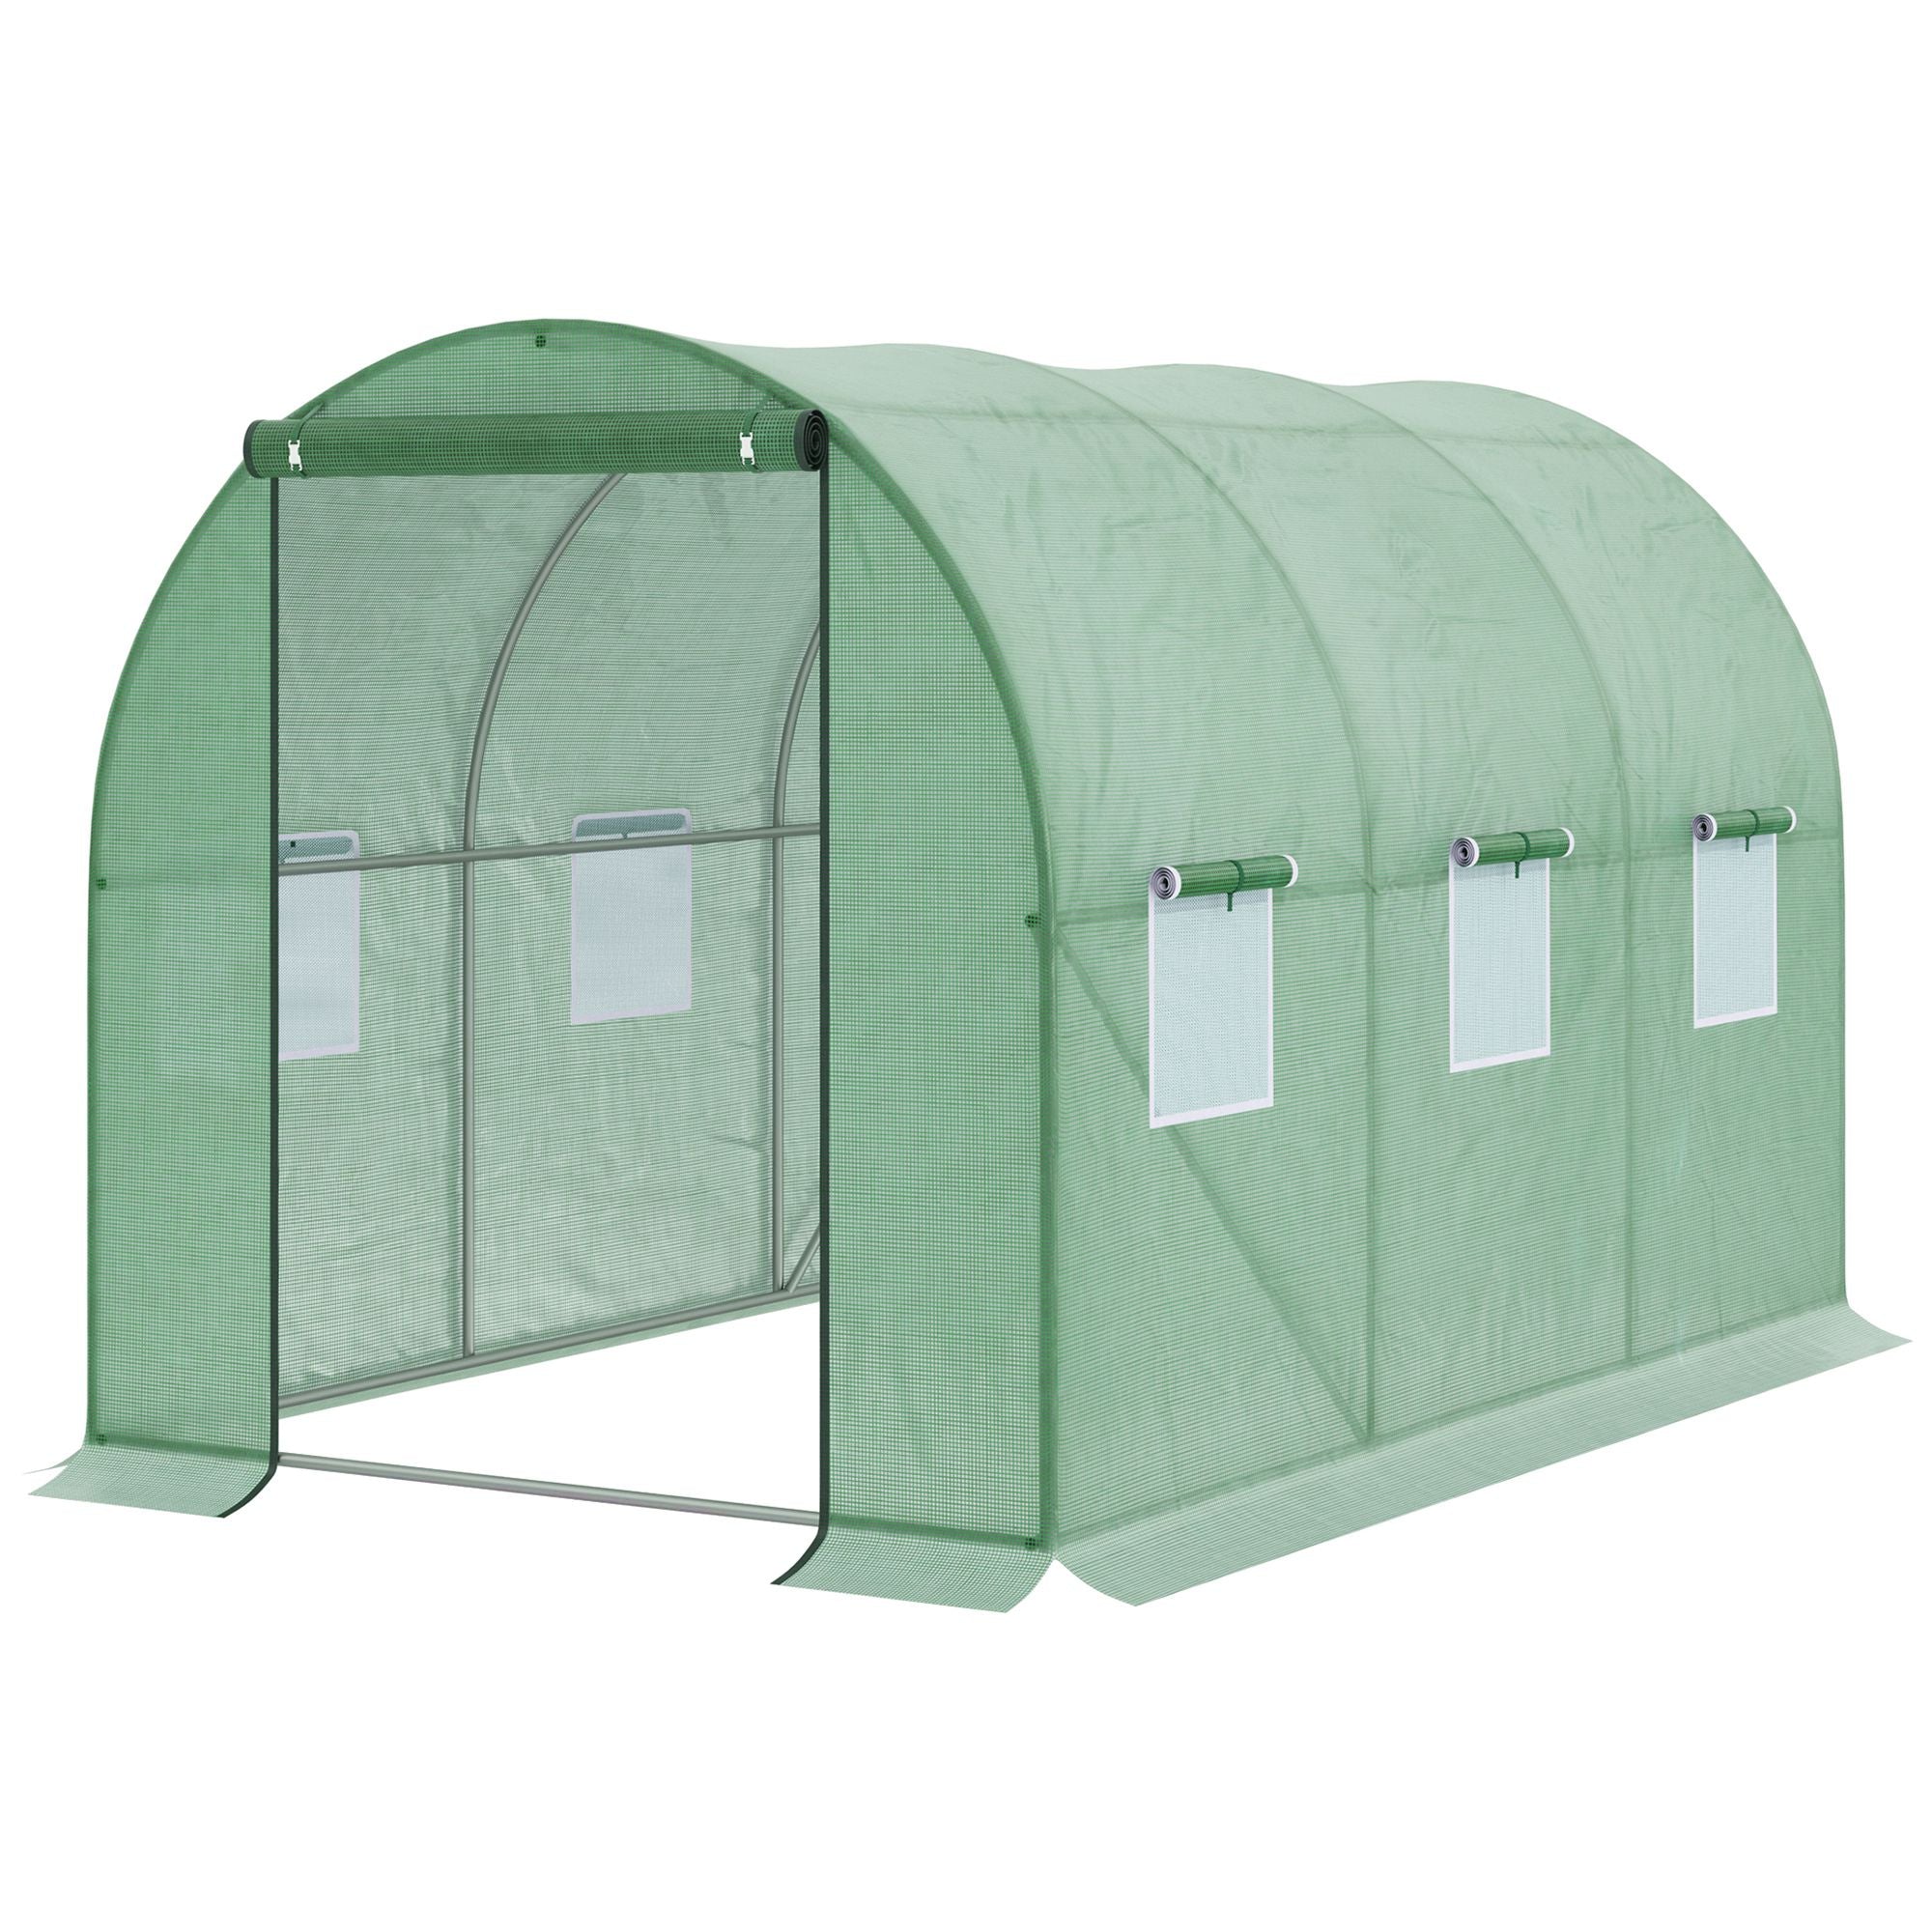 Outsunny Polytunnel Walk-in Garden Greenhouse with Zip Door and Windows 3 x 2M  | TJ Hughes